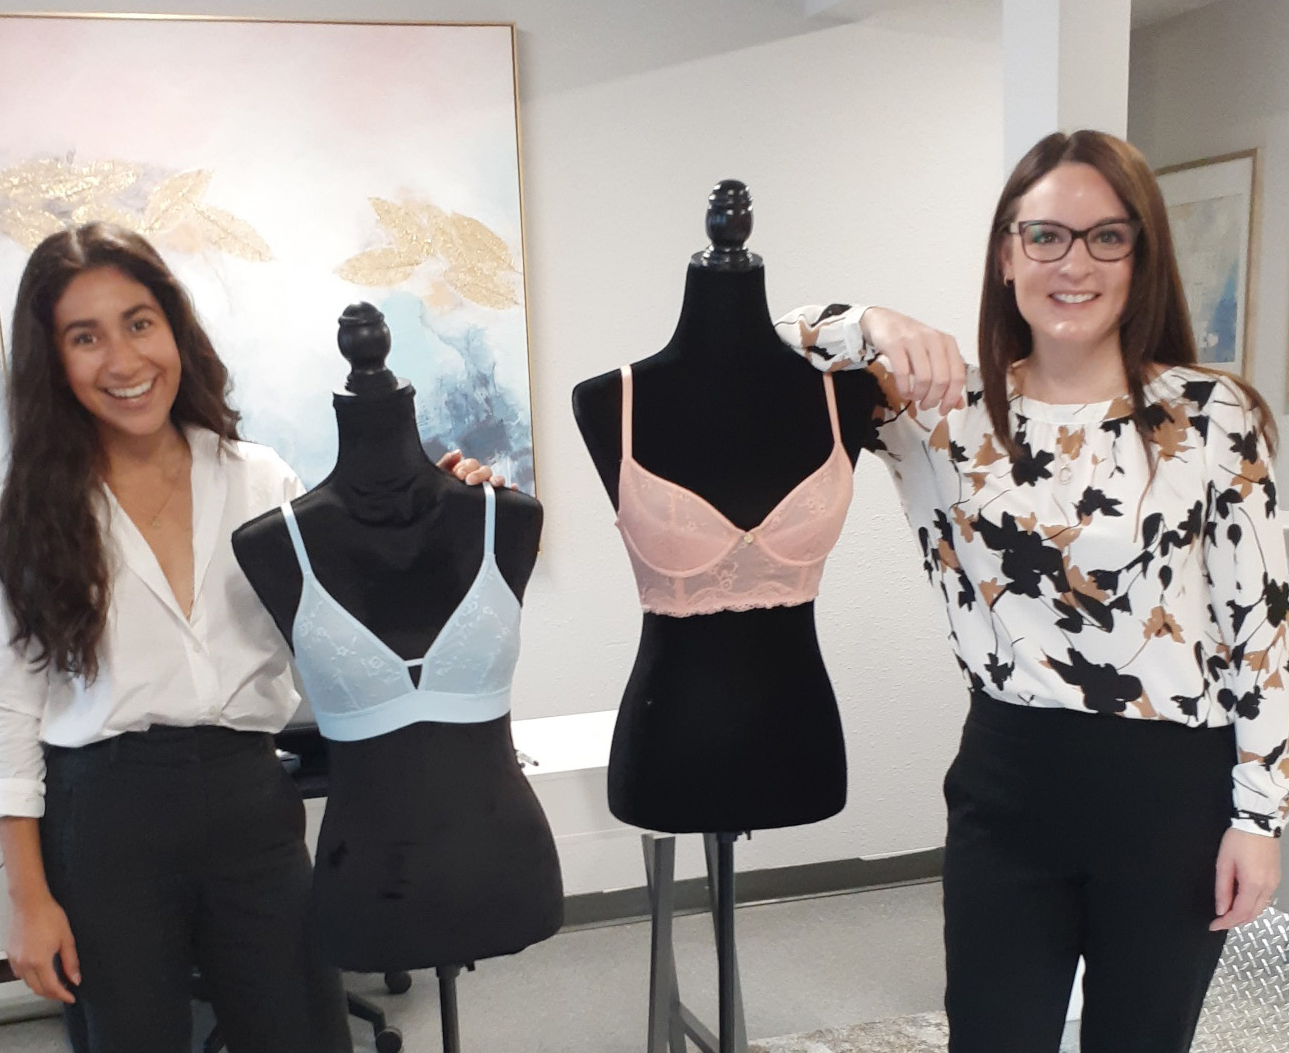 Prince George lingerie company starts with community service - Prince George  Citizen